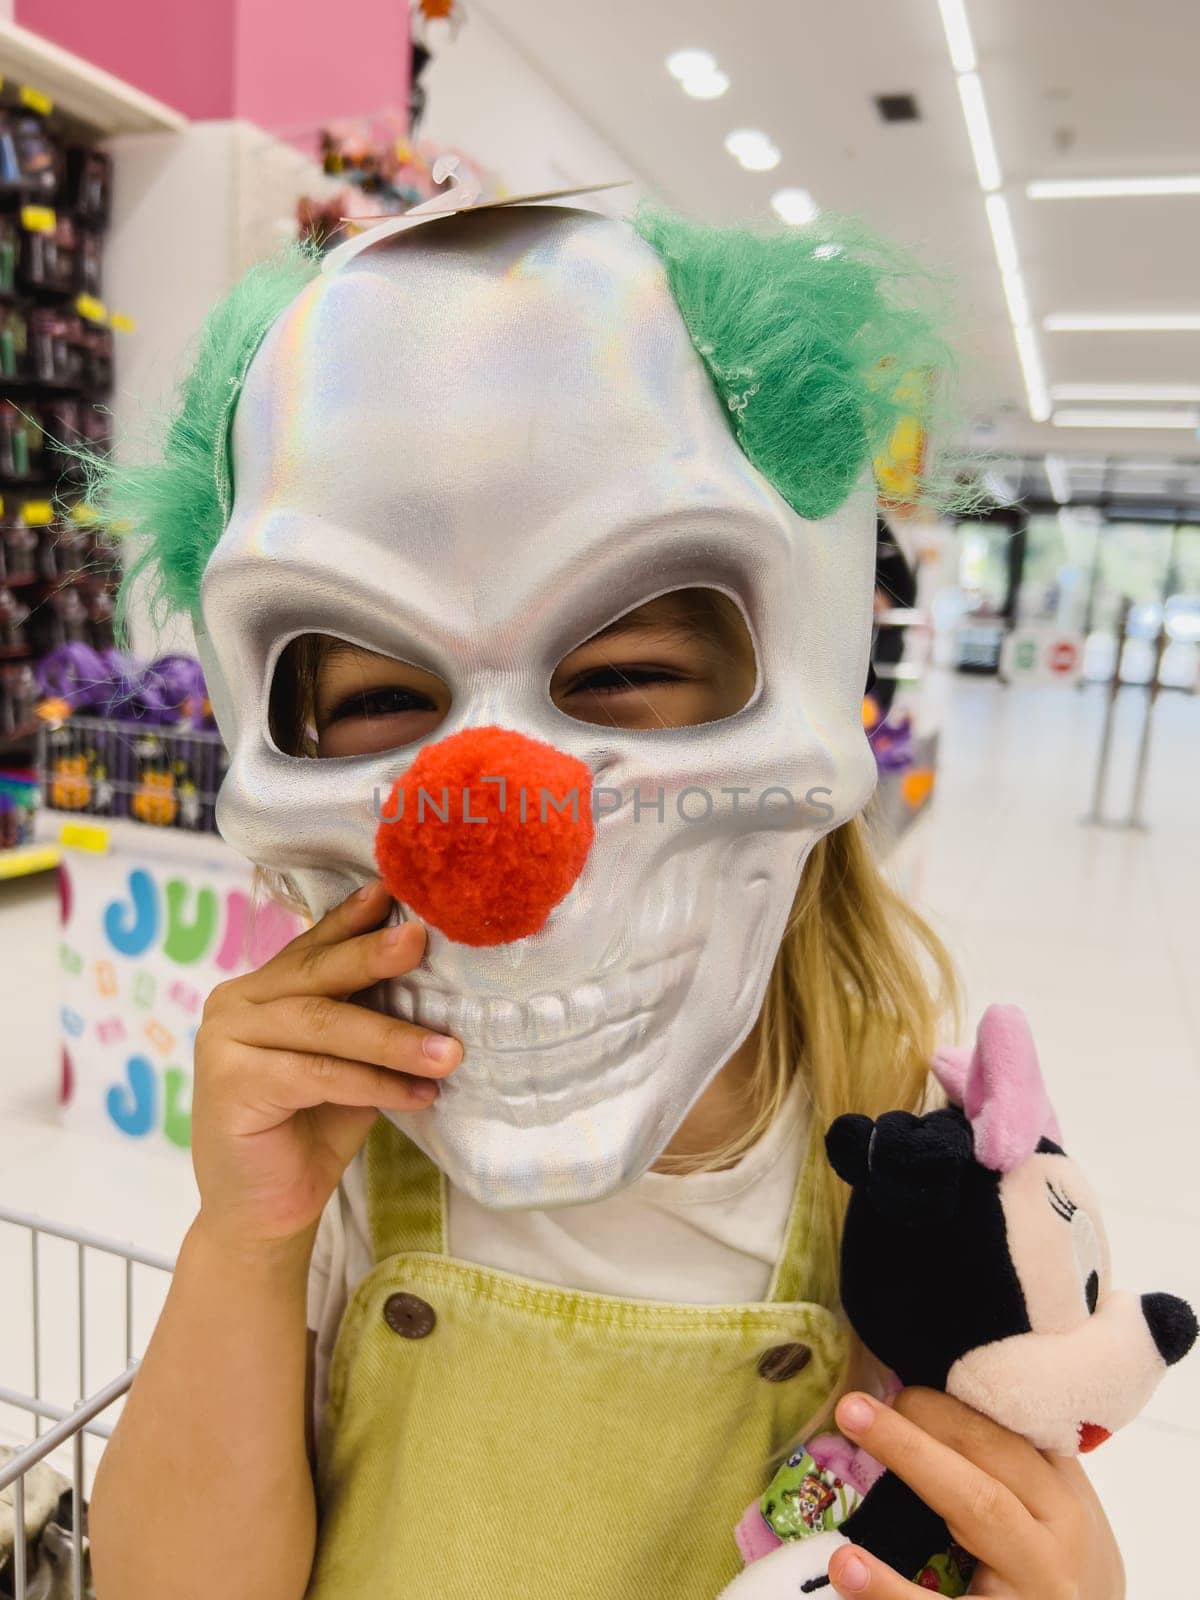 Podgorica, Montenegro - 14 august 2023: Little girl in the store trying on a scary clown mask by Nadtochiy